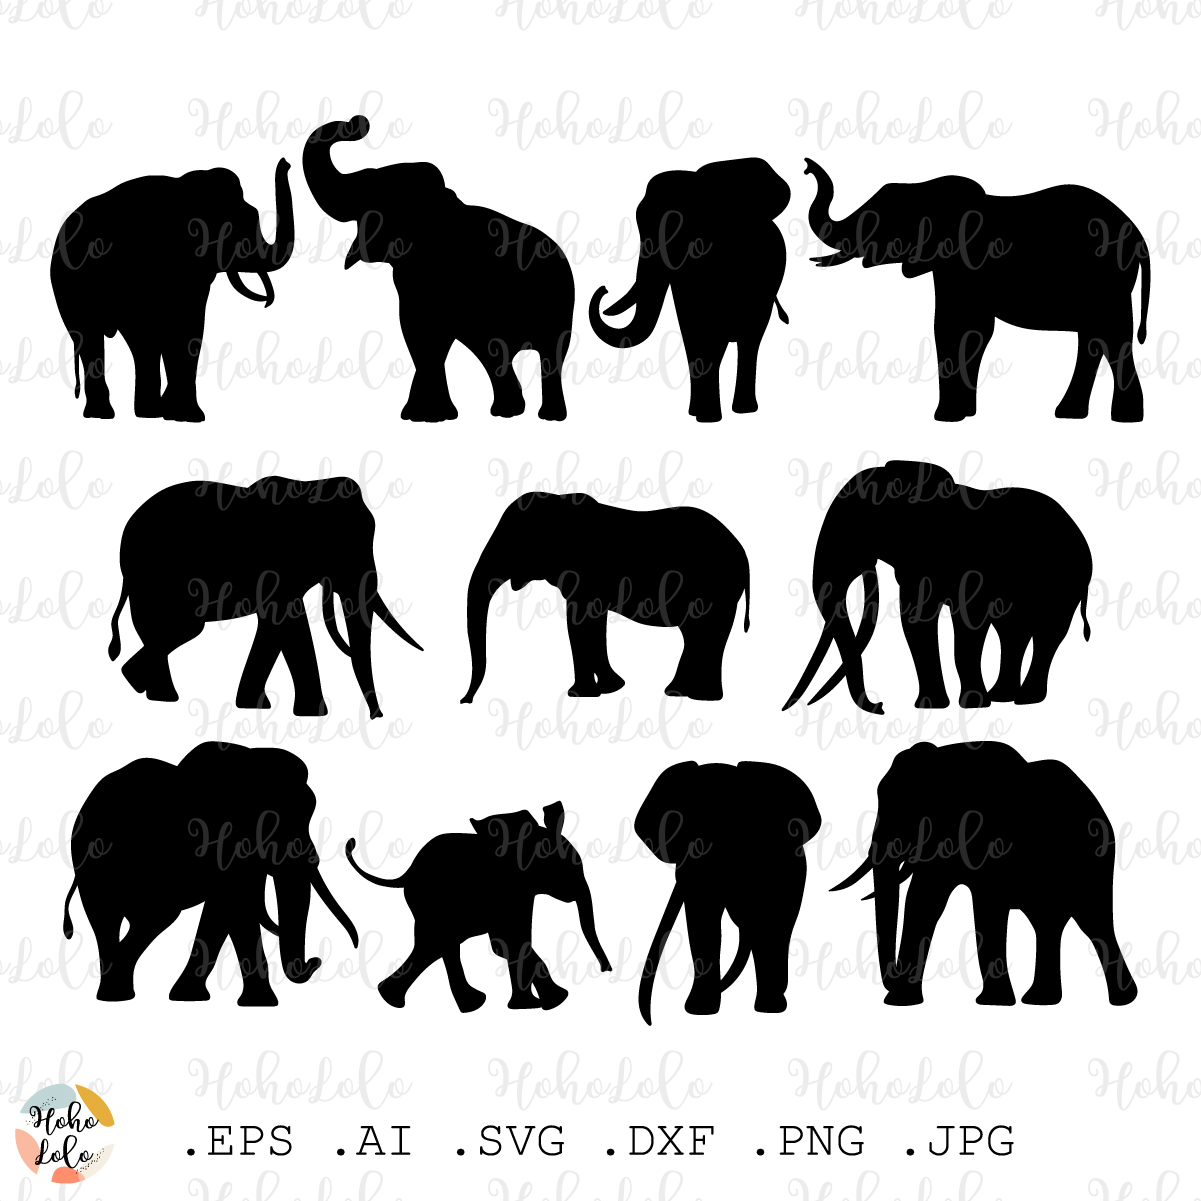 White Elephant Ornaments SVG - We Can Make That